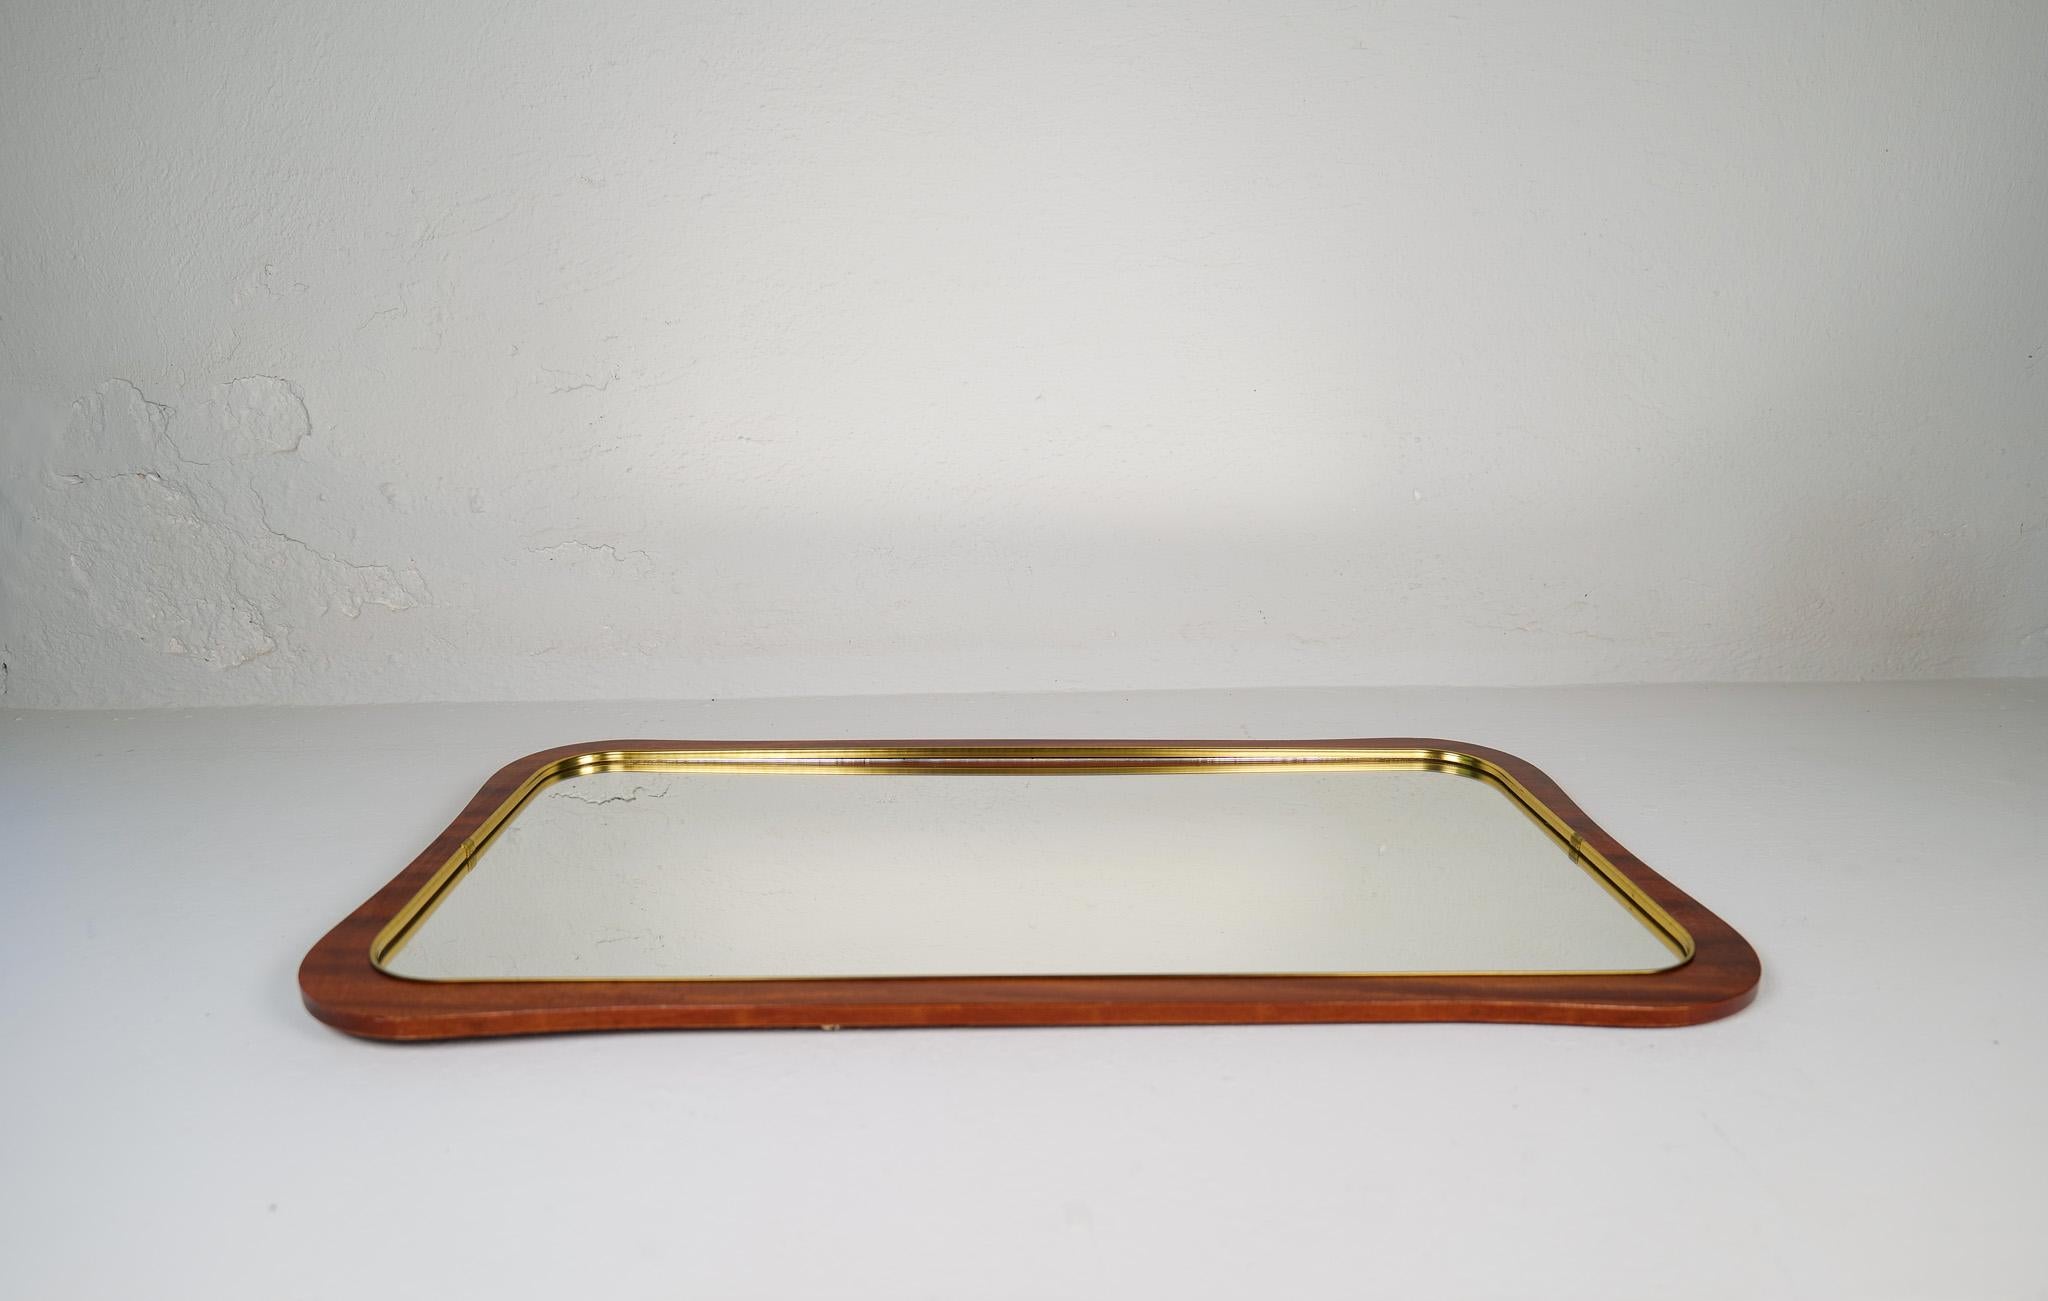 Midcentury Modern Pair of Wood and Brass Mirrors Sweden 1950s For Sale 8